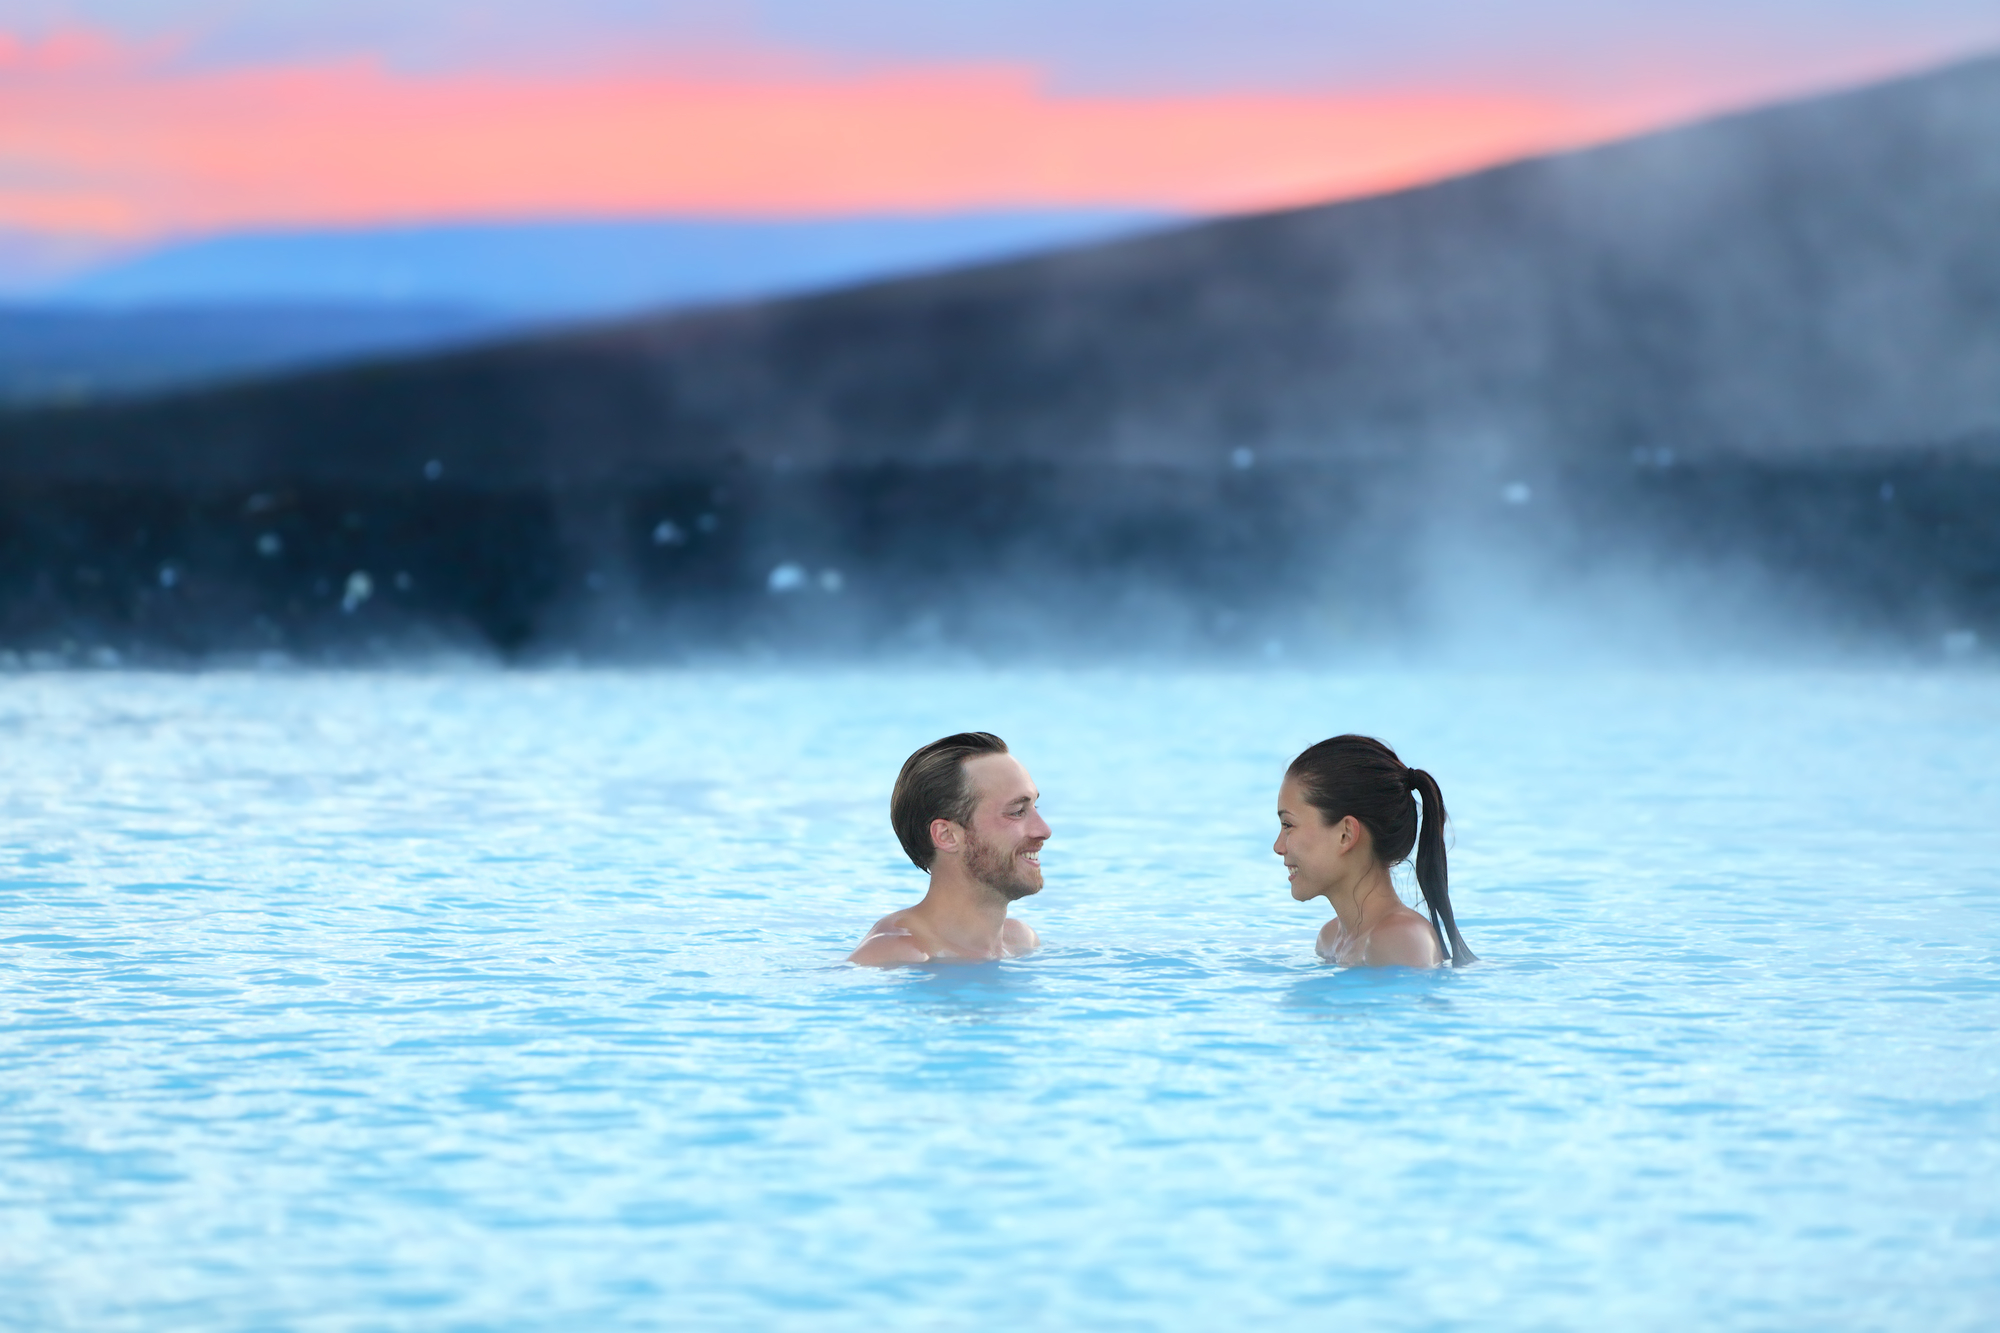 Hot thermal springs - Blue Lagoon, Iceland